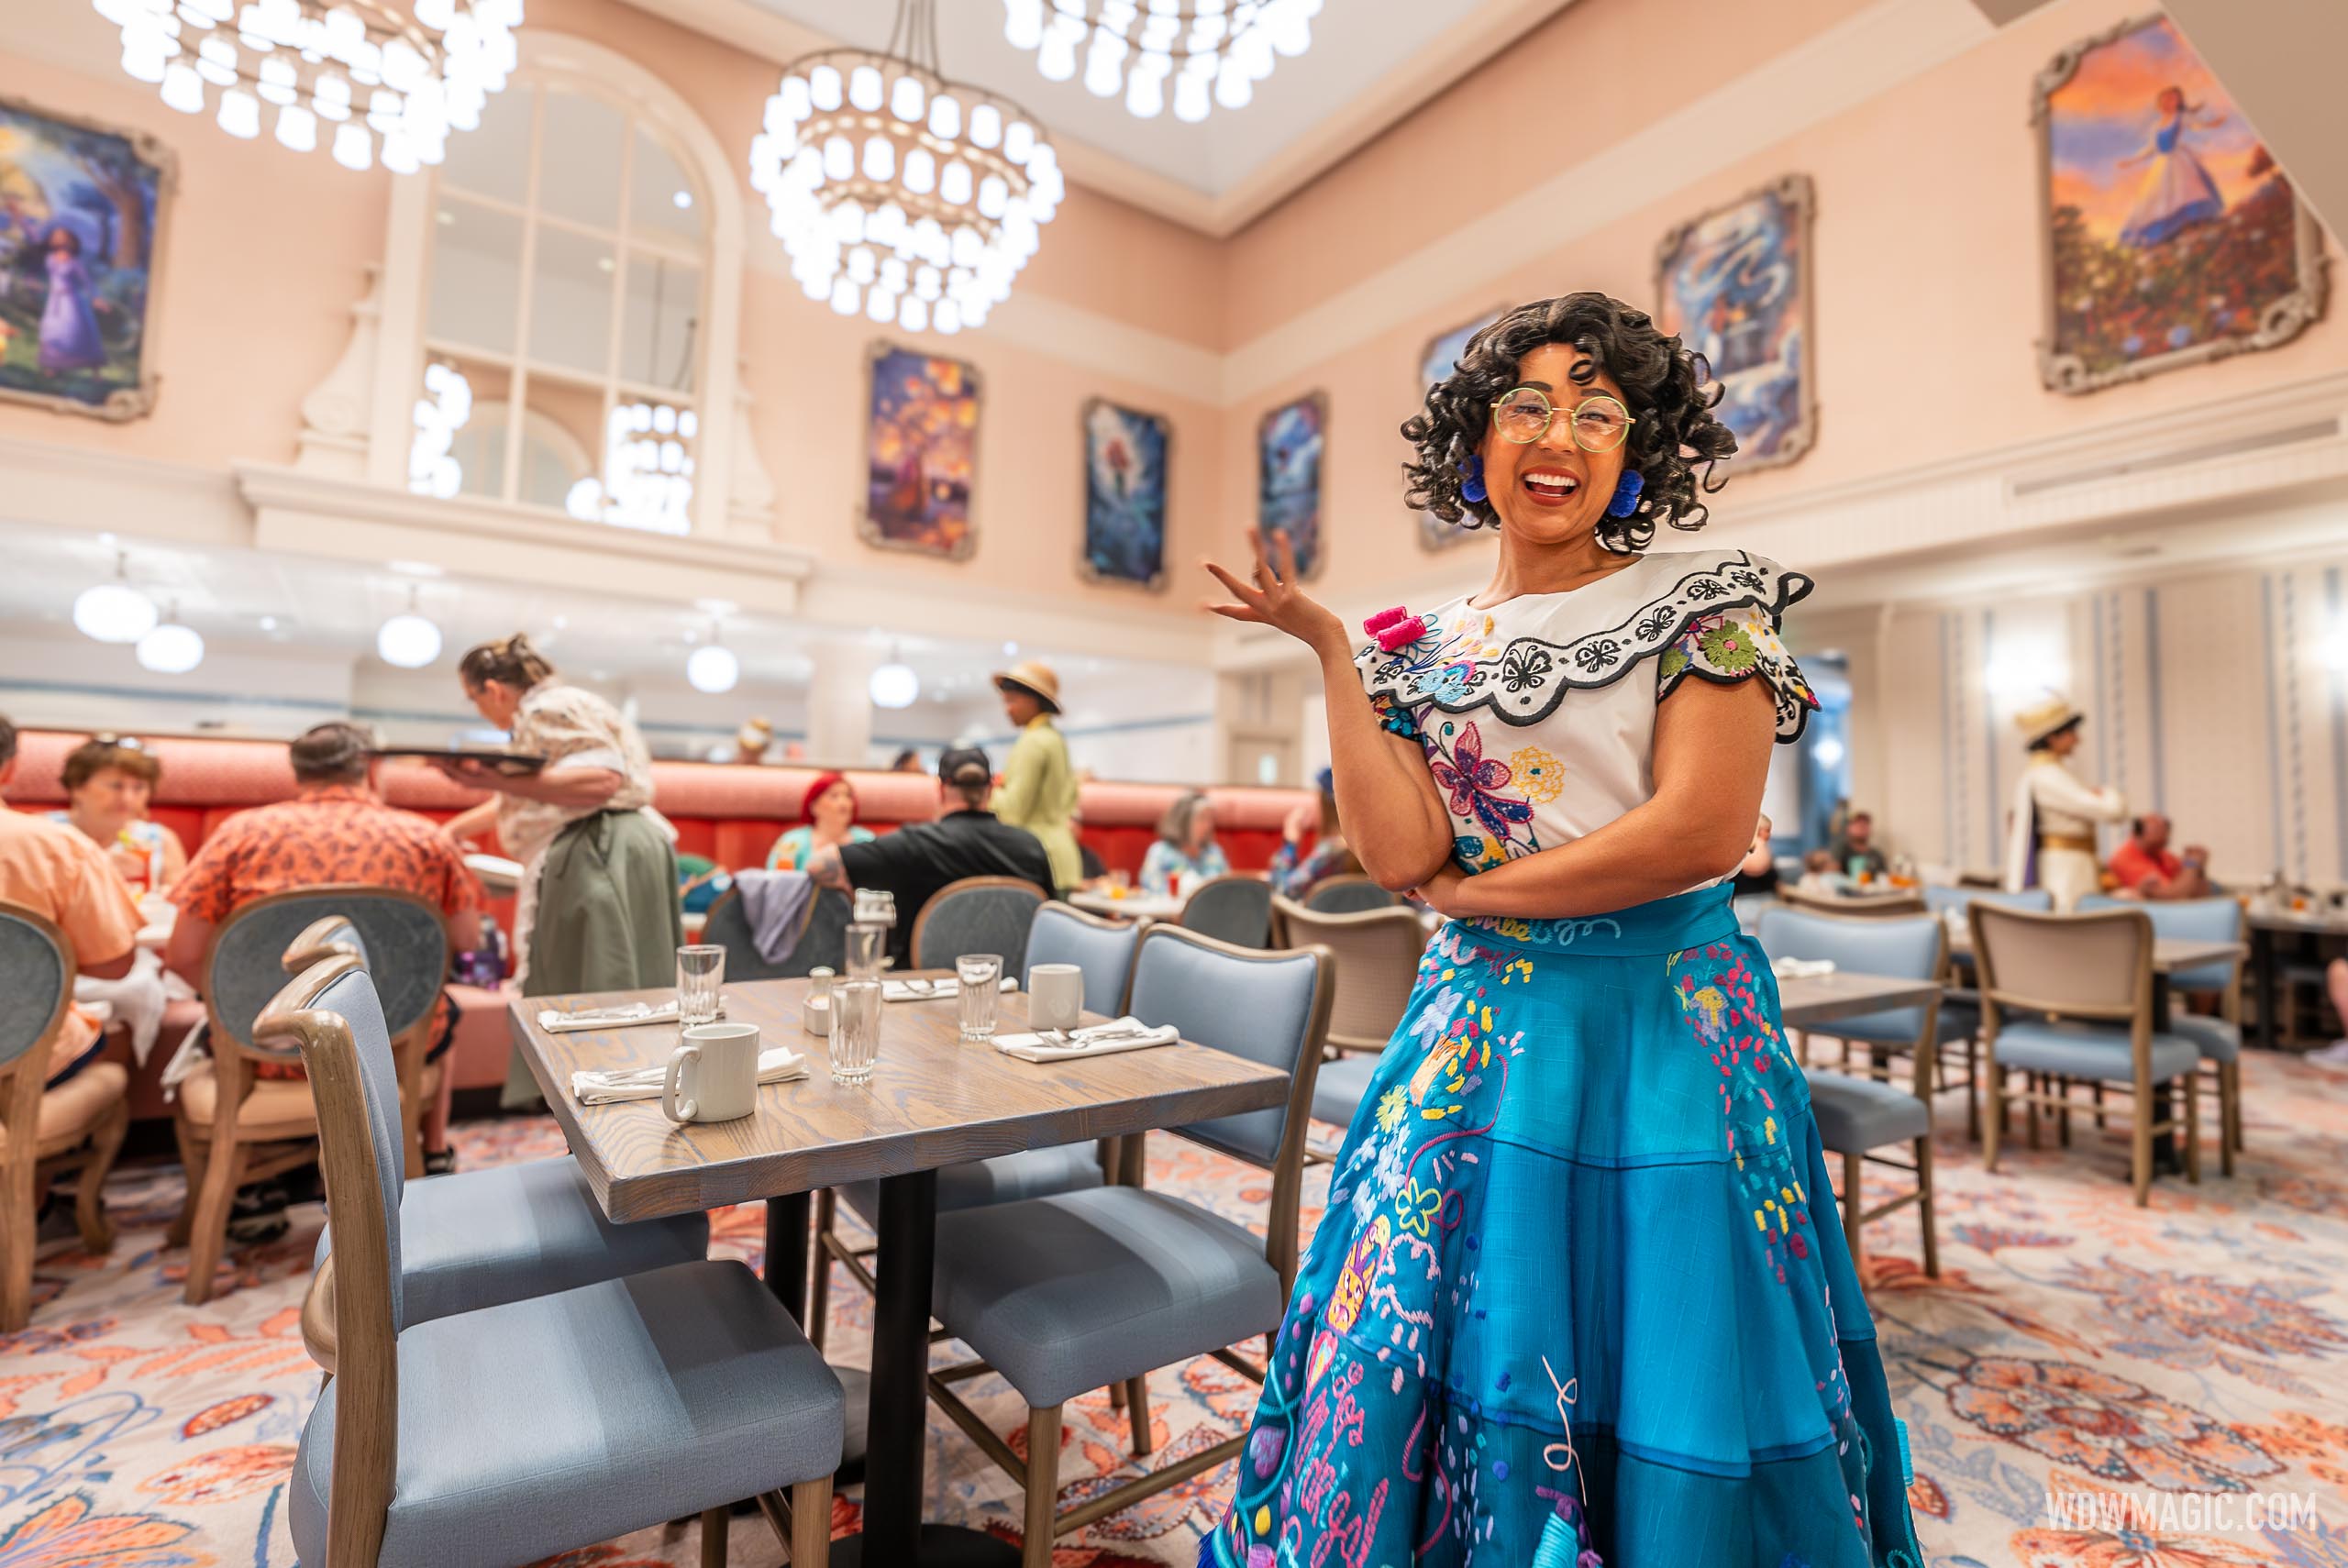 First look at the all-new 1900 Park Fare character breakfast at Walt Disney World